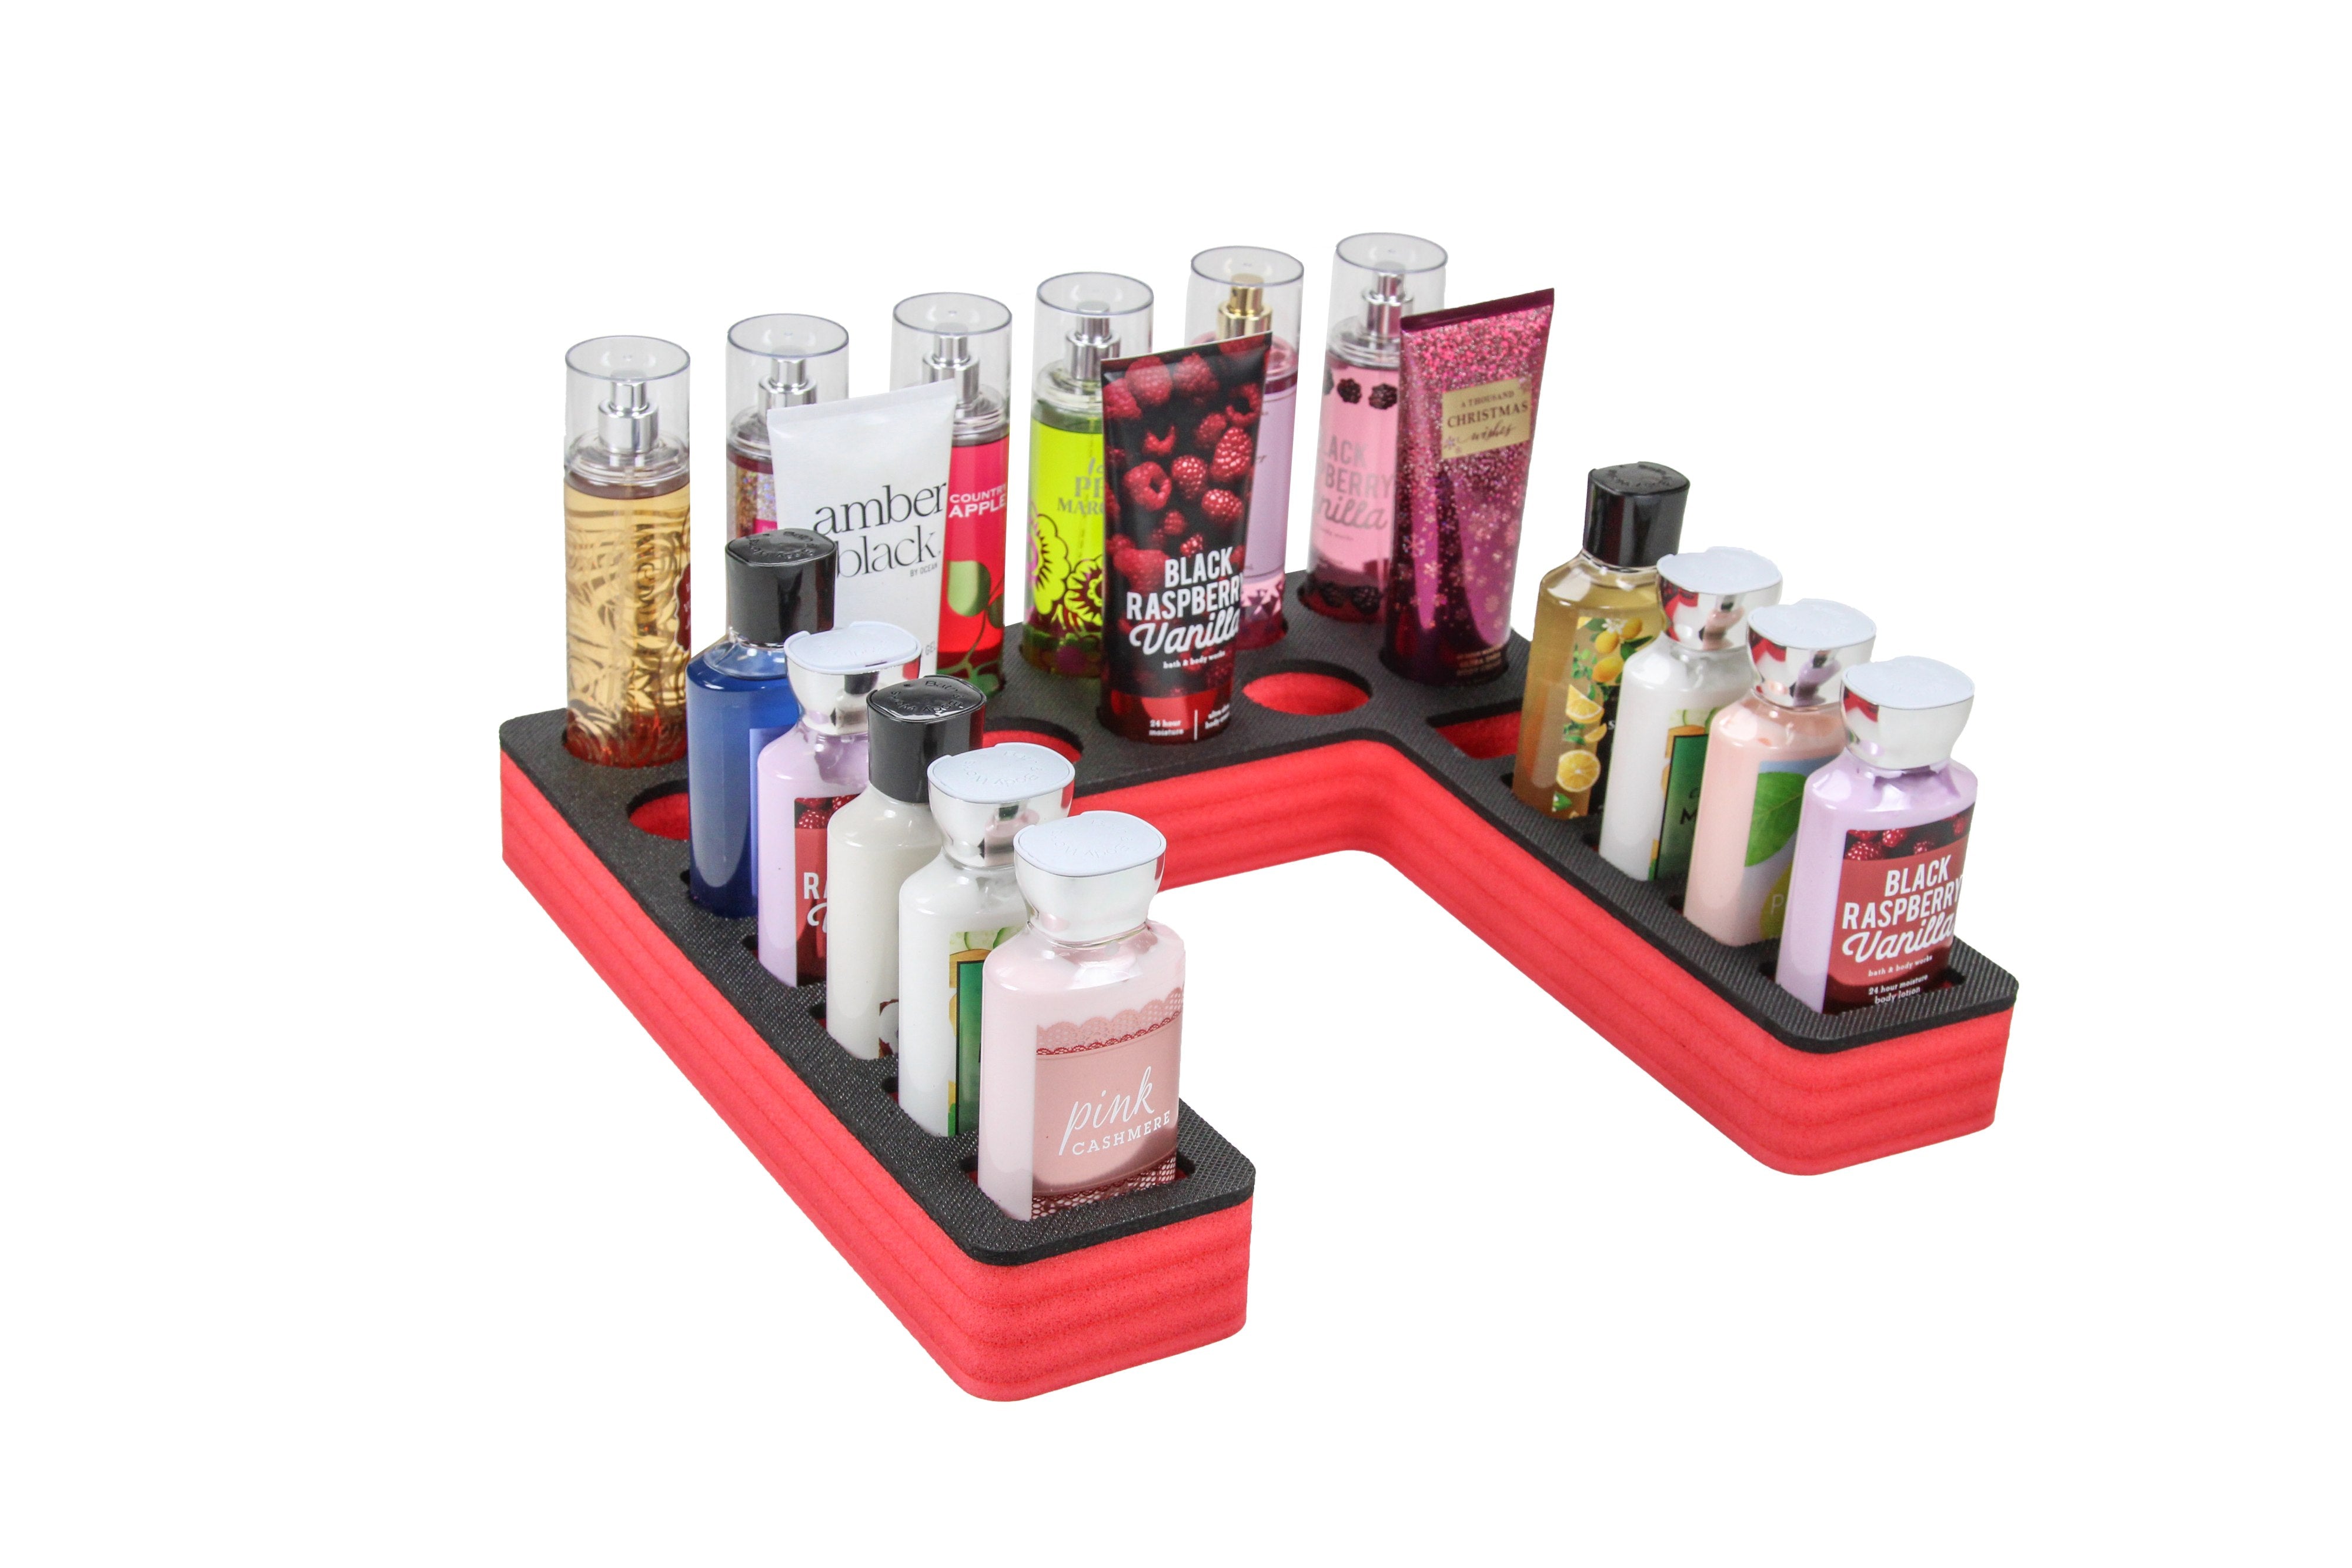 Lotion Body Spray St Organizer Tray Red Durable Foam Washable Waterproof Insert for Home Bathroom Bedroom Office 16.25 x 16.25 x 2 Inches 22 Slots